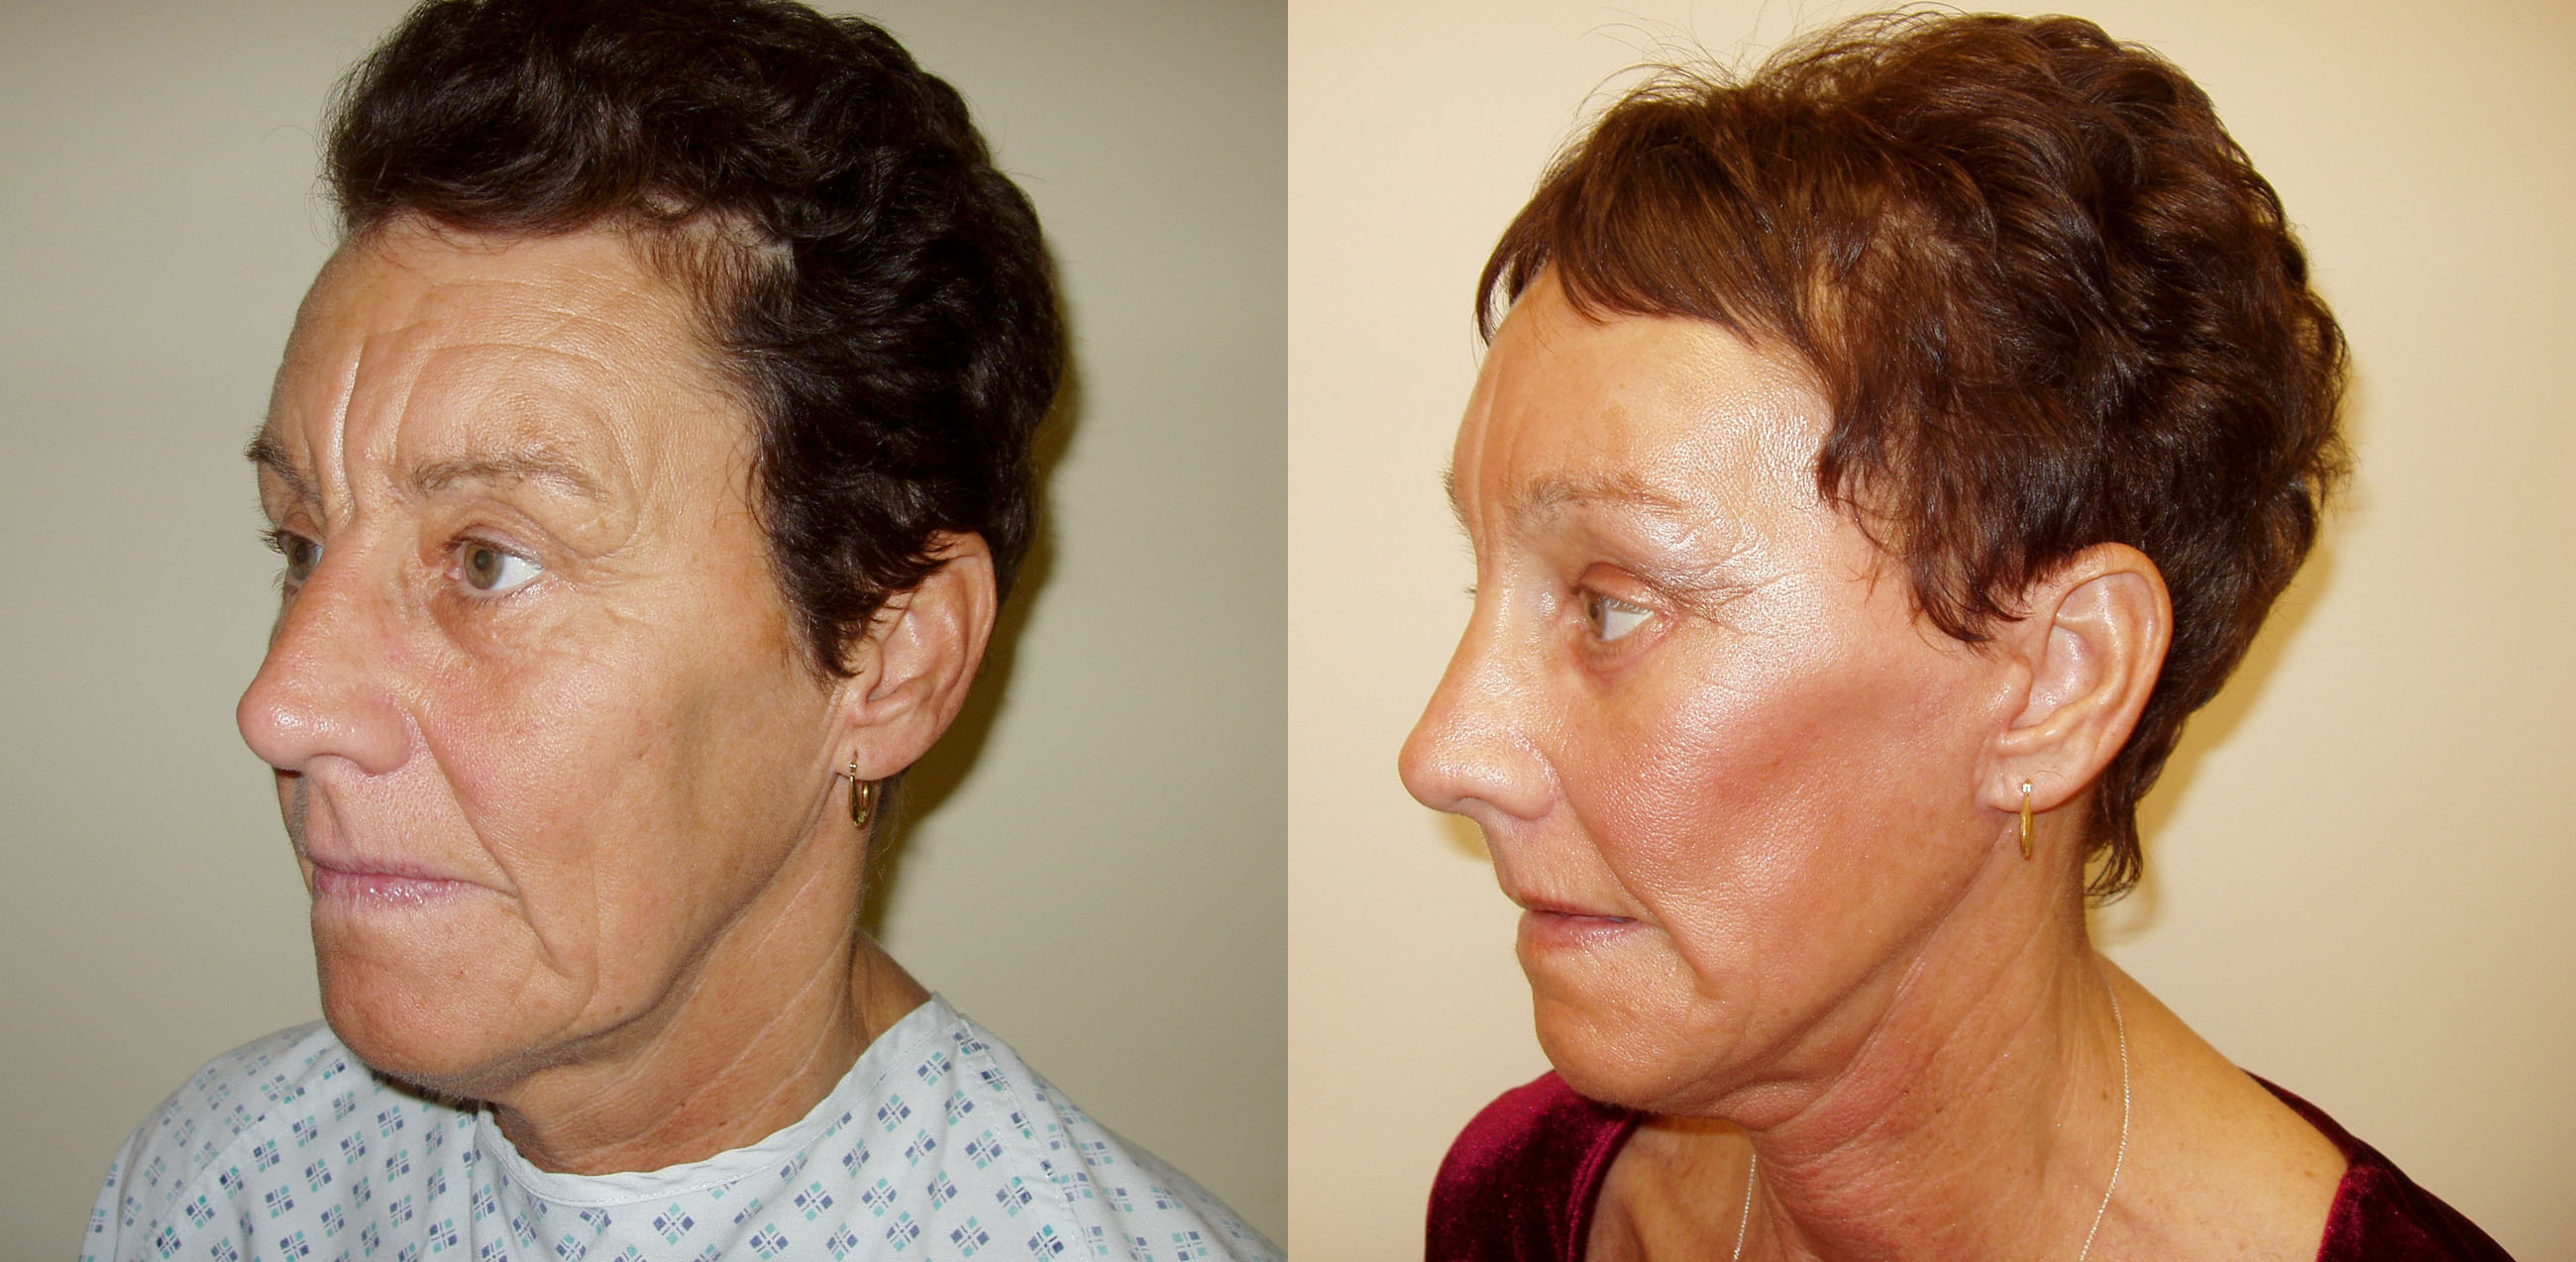 face lift / brow lift / eyelid lift surgery in Manchester and London